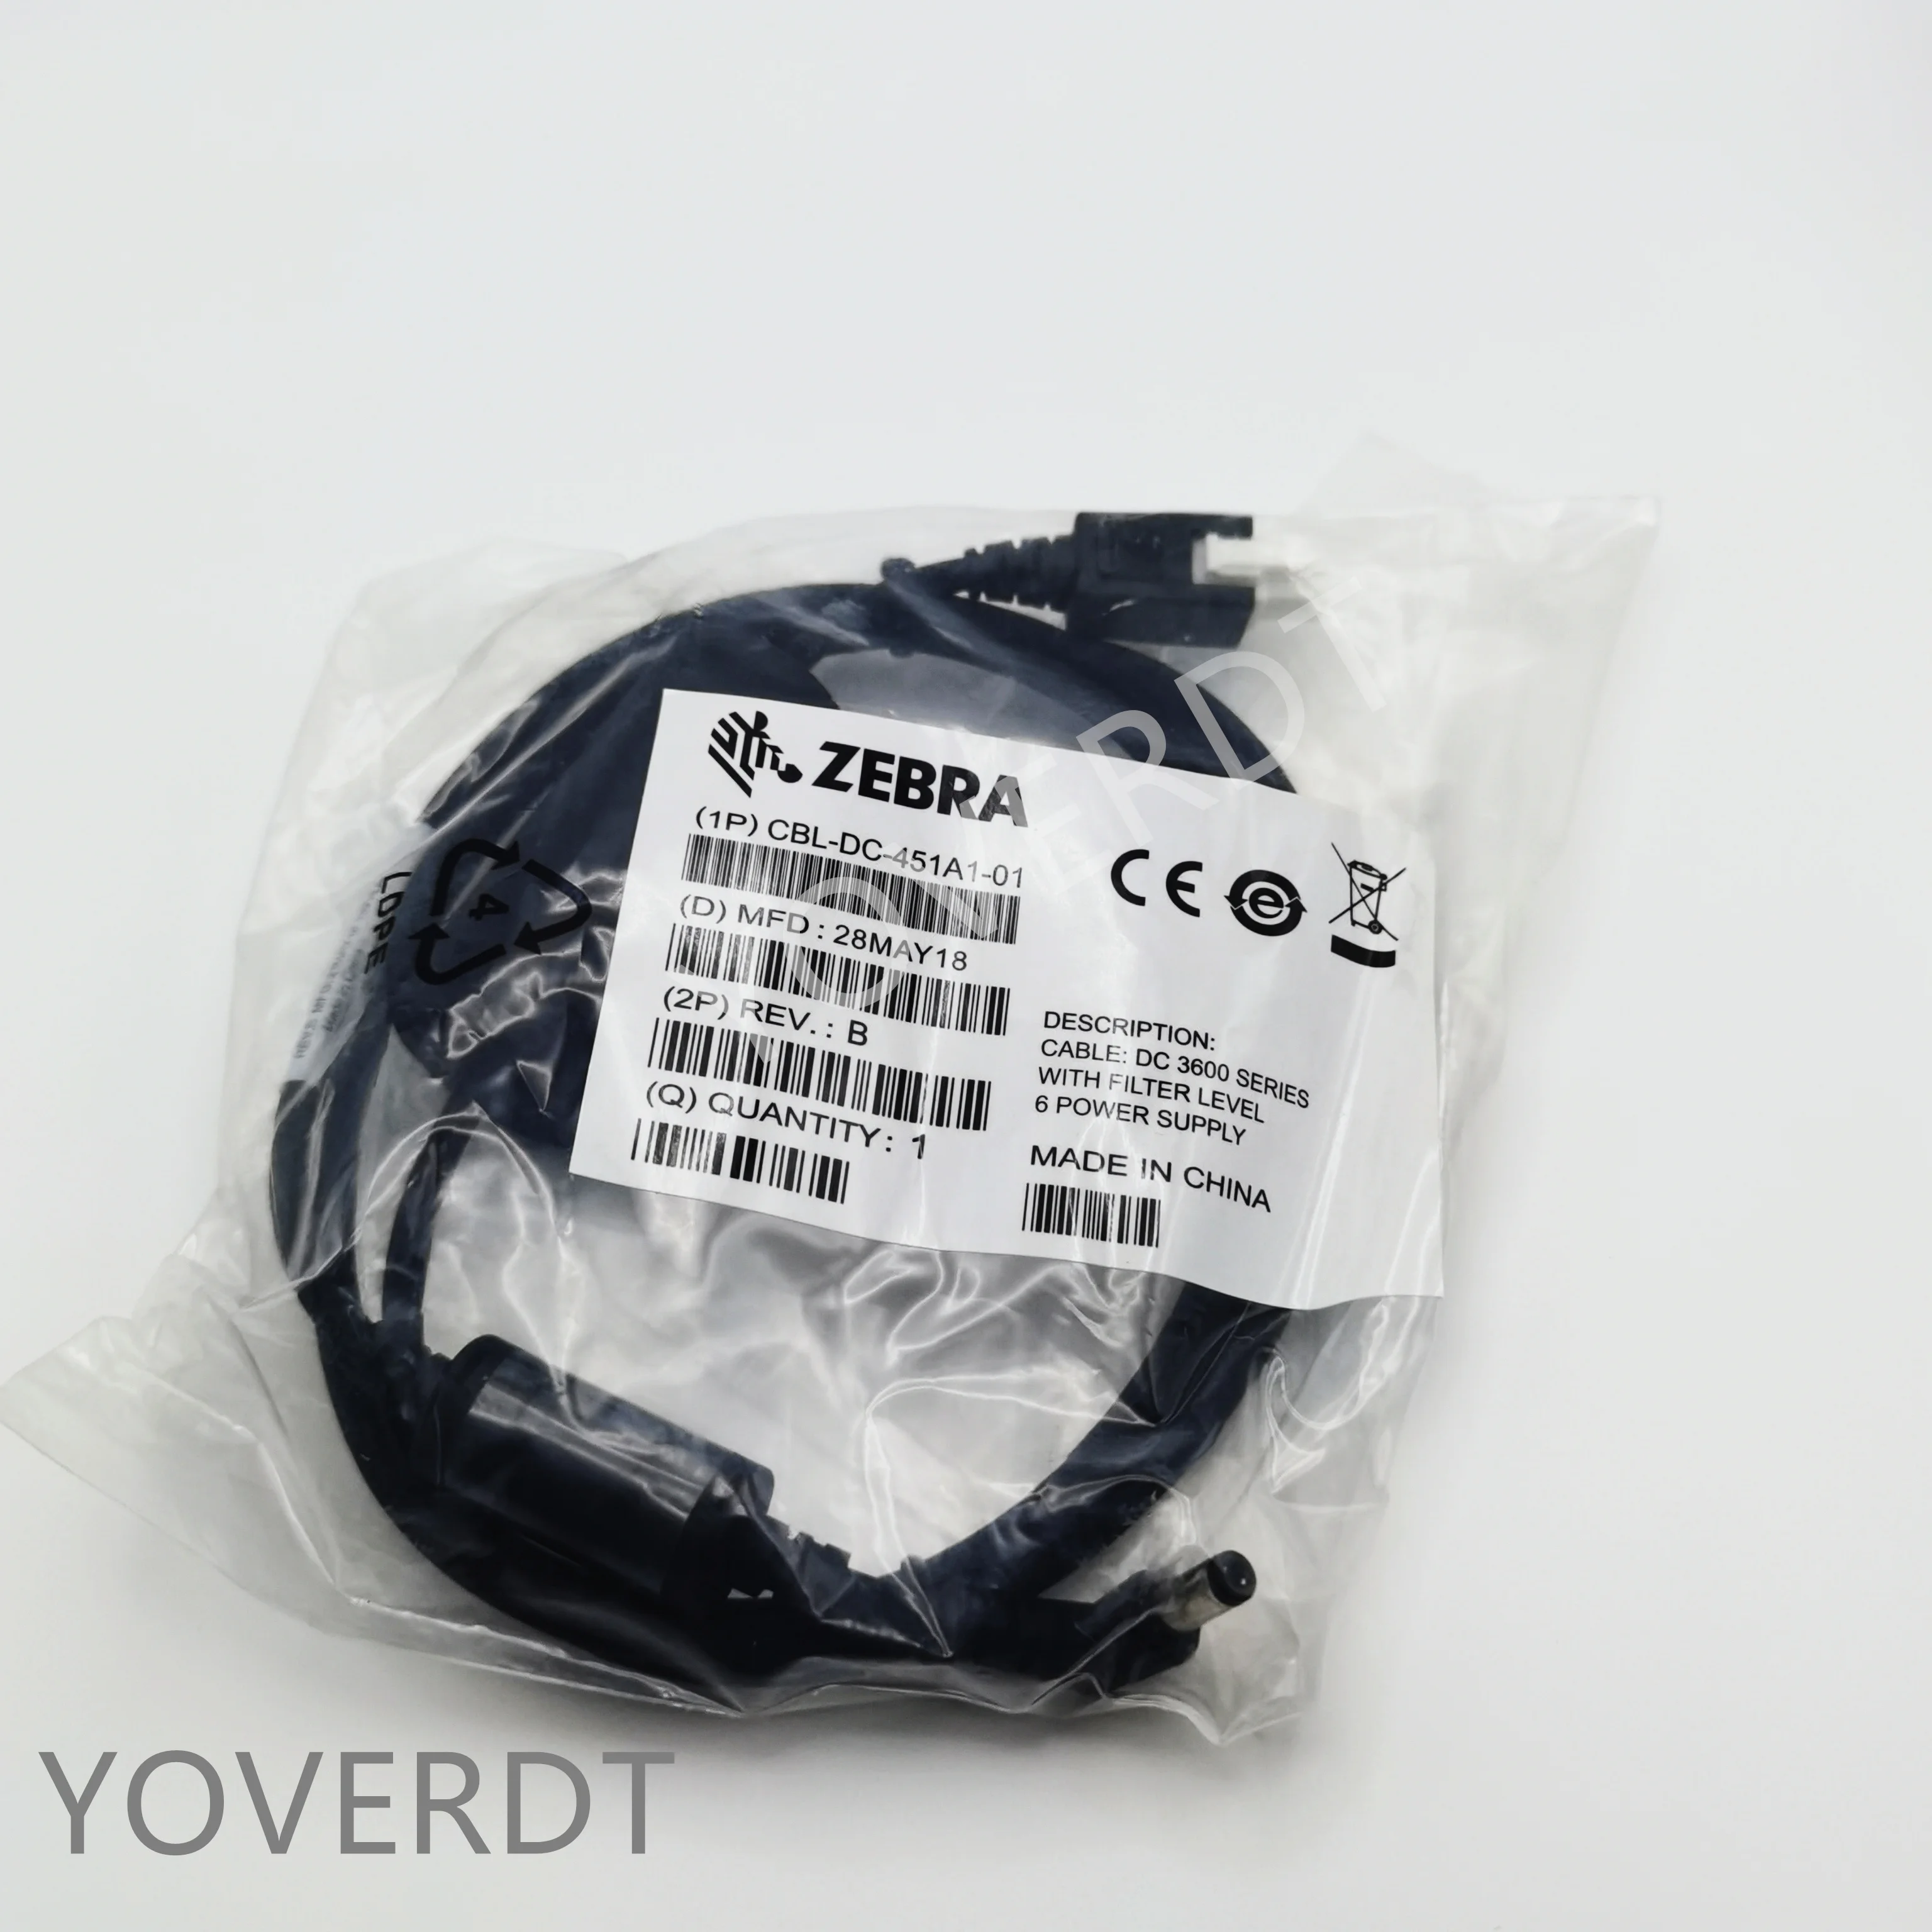 Zebra Cbl-dc-451a1-01 Dc Cable For 3600 Series With Filter Level 6 Power  Supply - Scanners - AliExpress